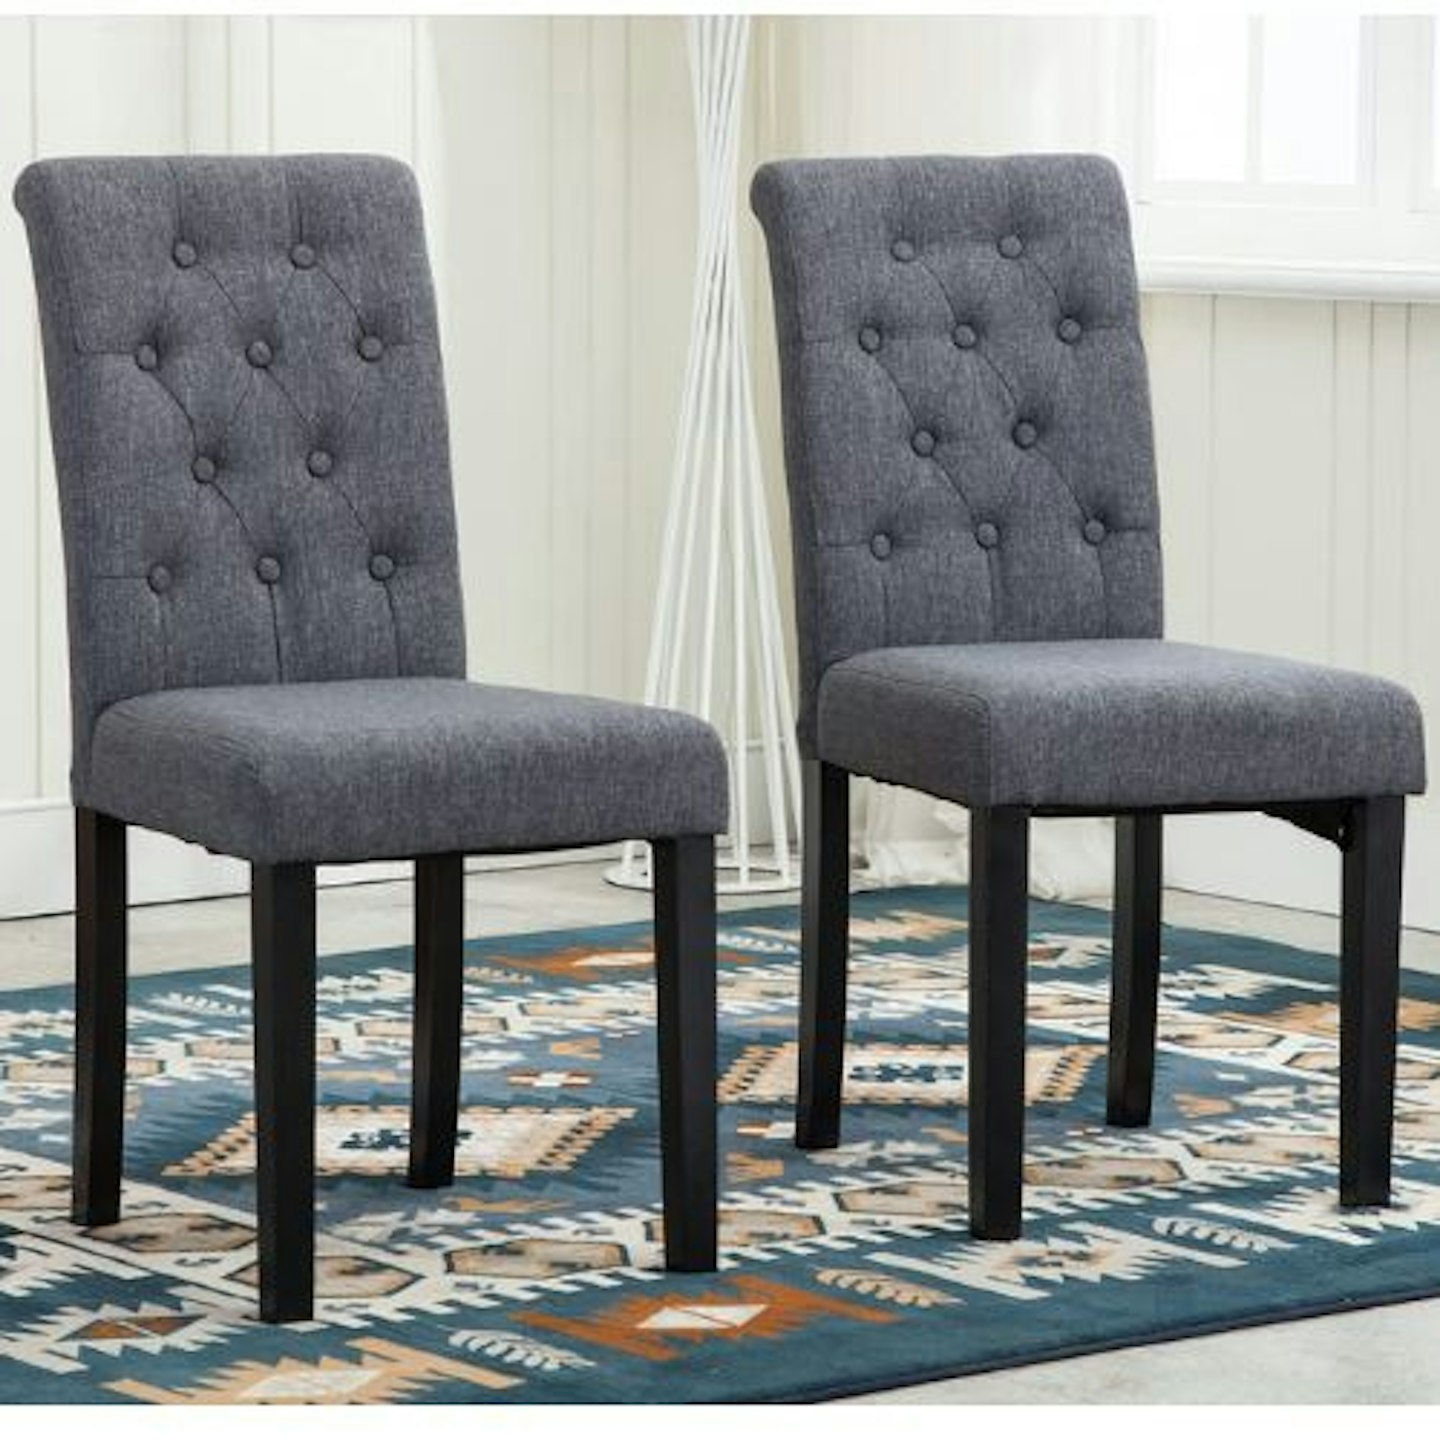 Set of 2 Lined Fabric Dining Chairs With Solid Wooden Legs